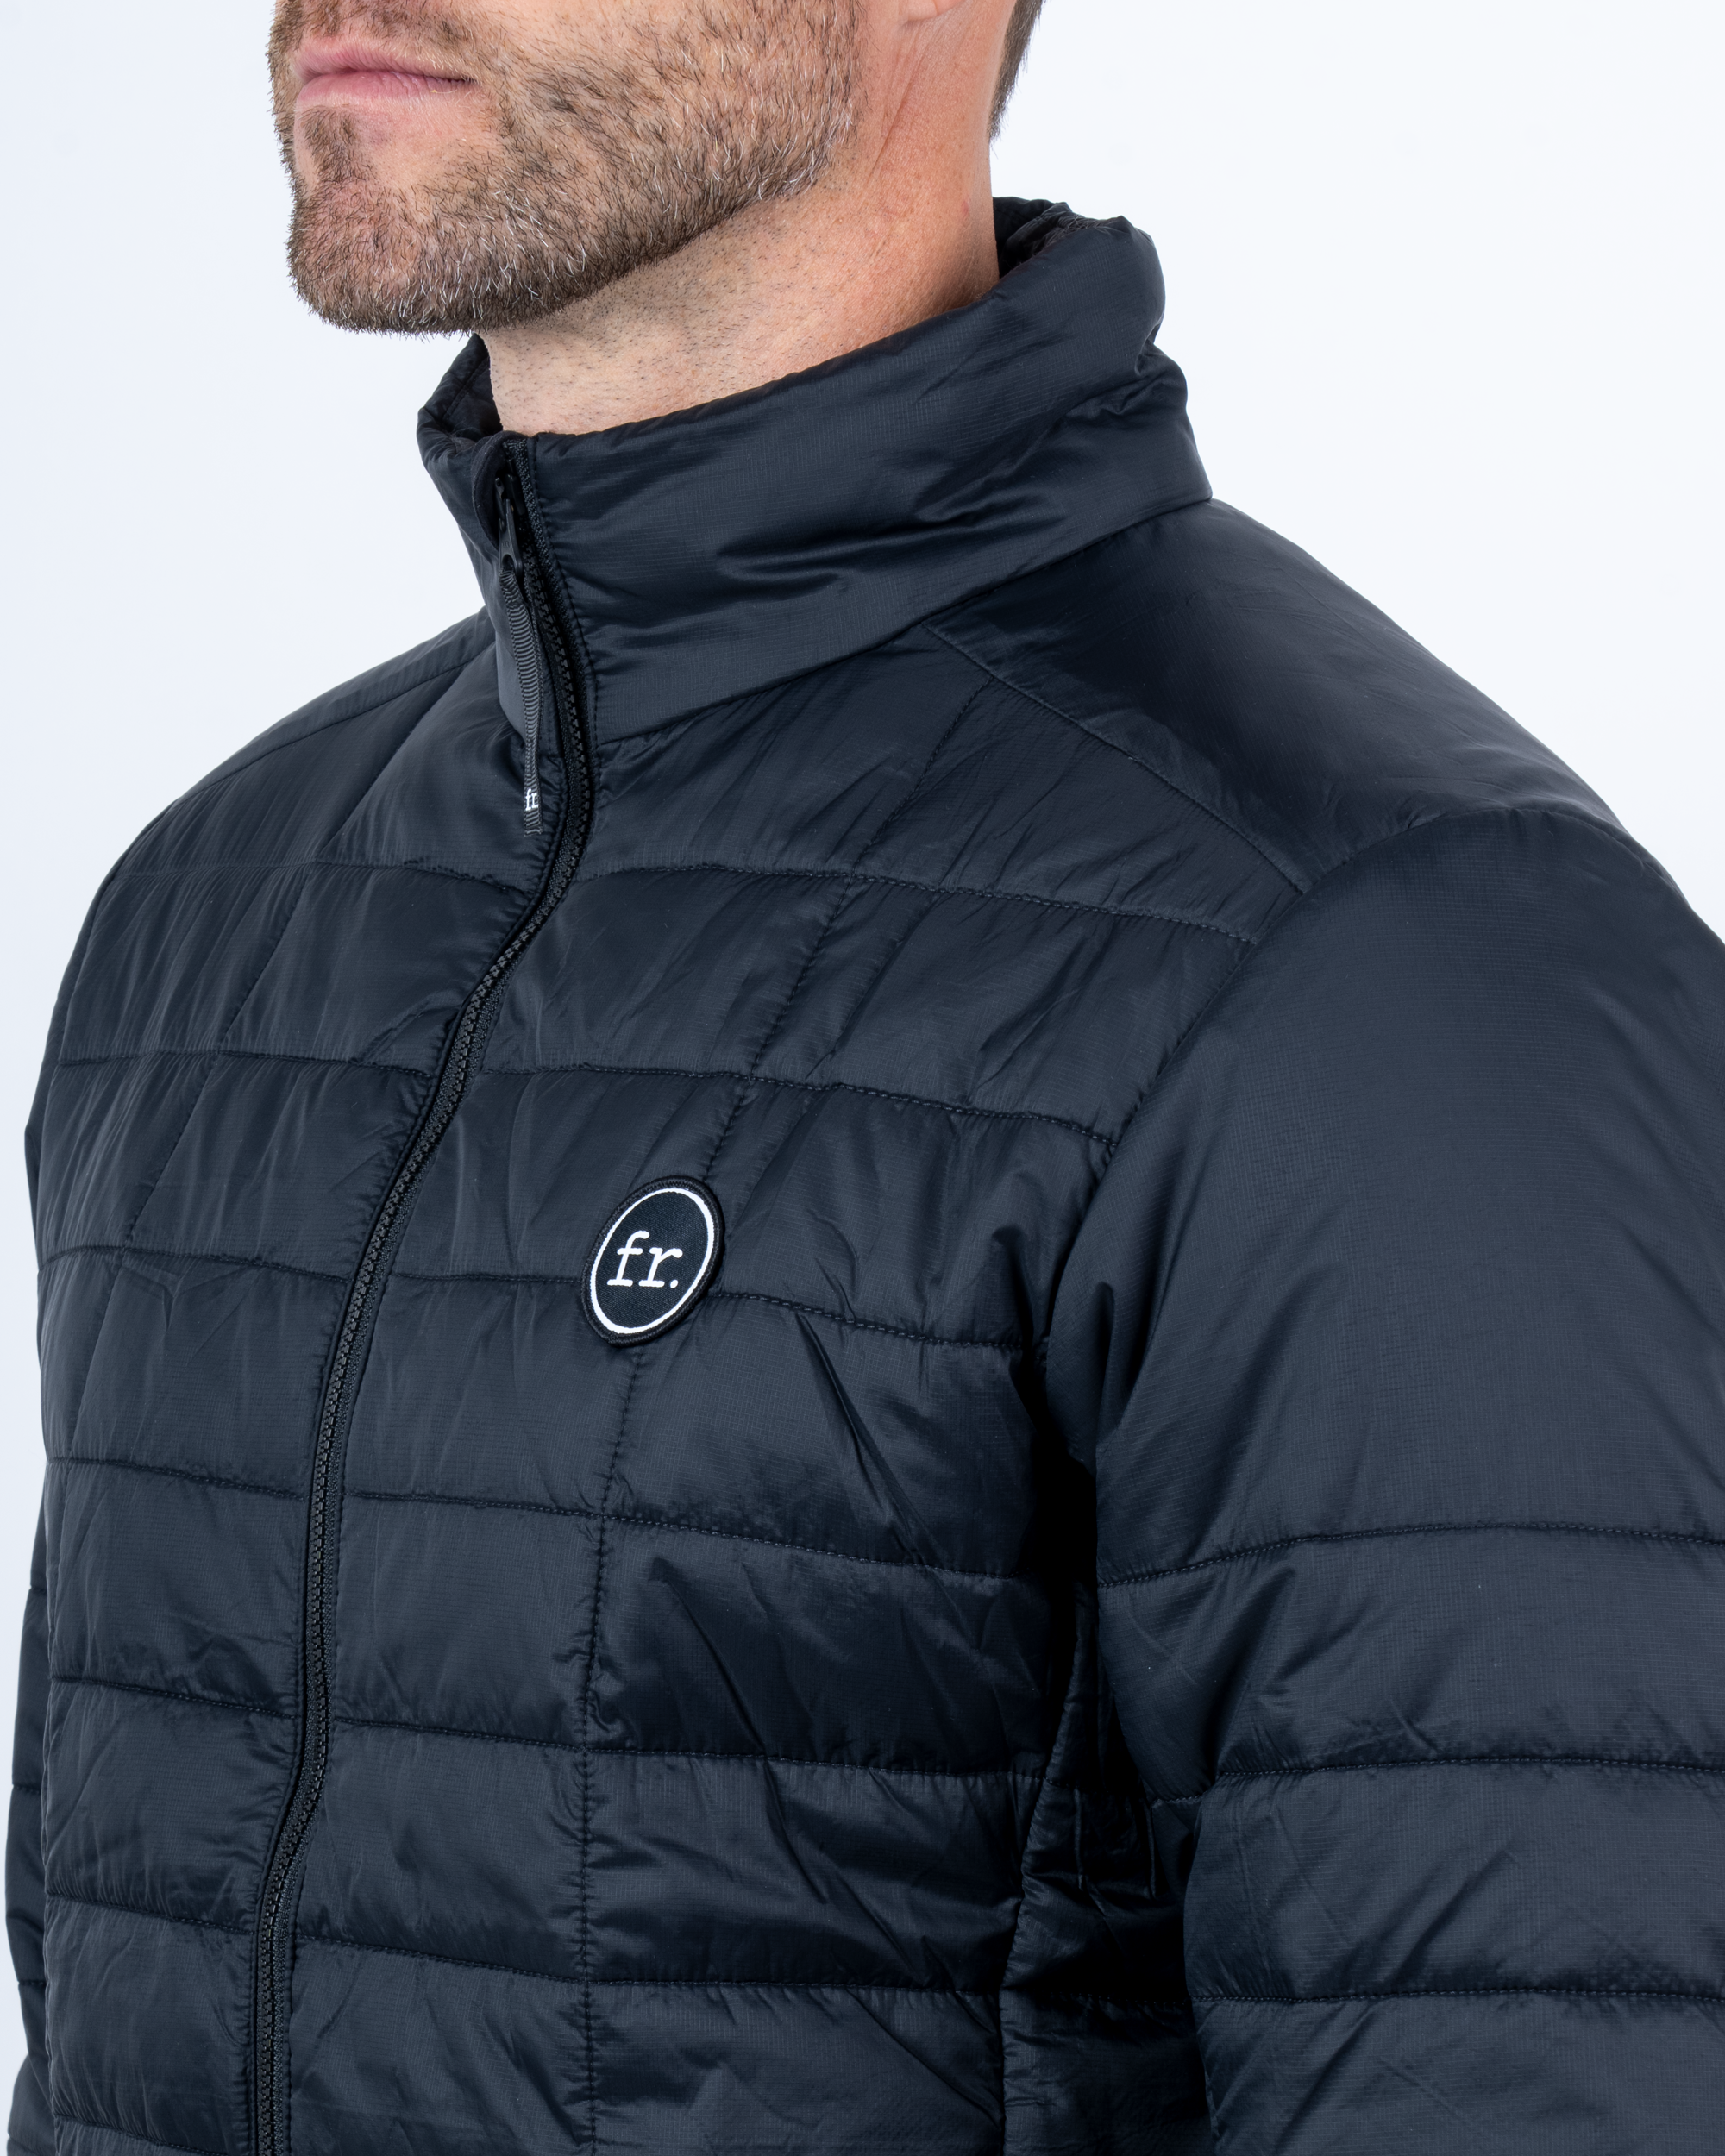 Foreign Rider Co Recycled Primaloft Gold Insulated Eco Black Jacket Chest Stitch FR Logo and Shoulder Detail